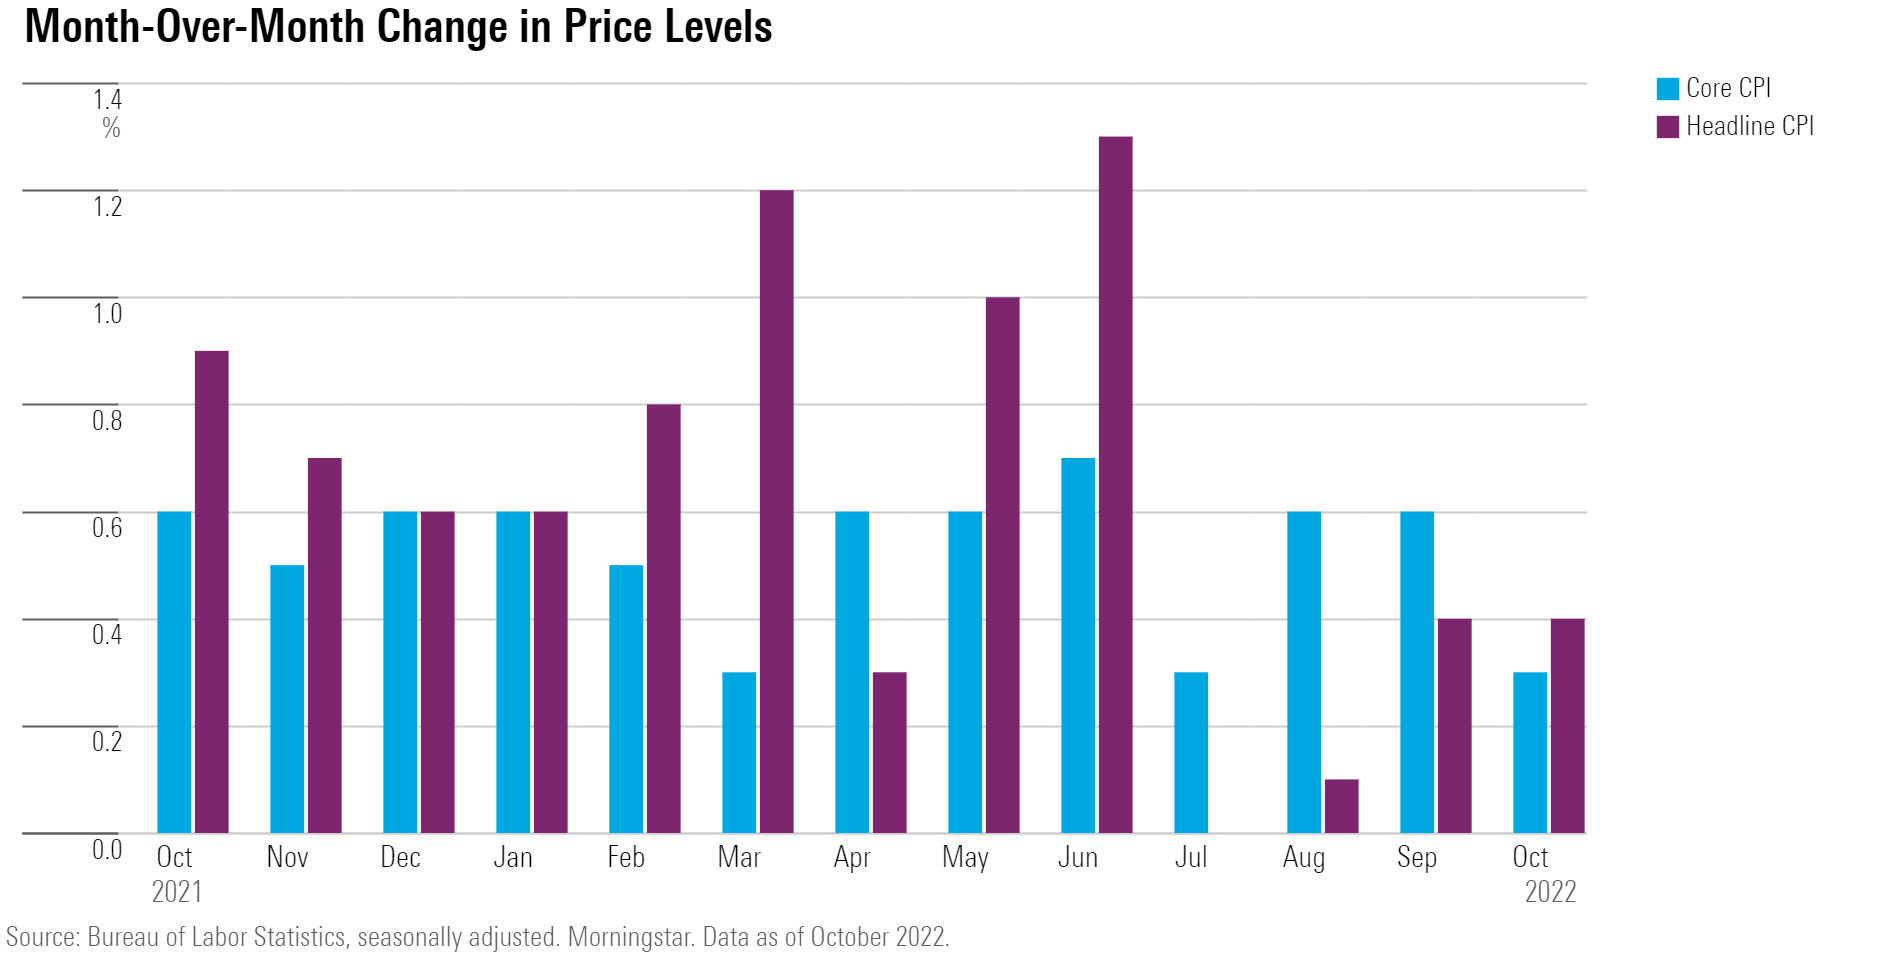 Month-over-month changes in price levels for Core CPI and Headline CPI through October 2022.